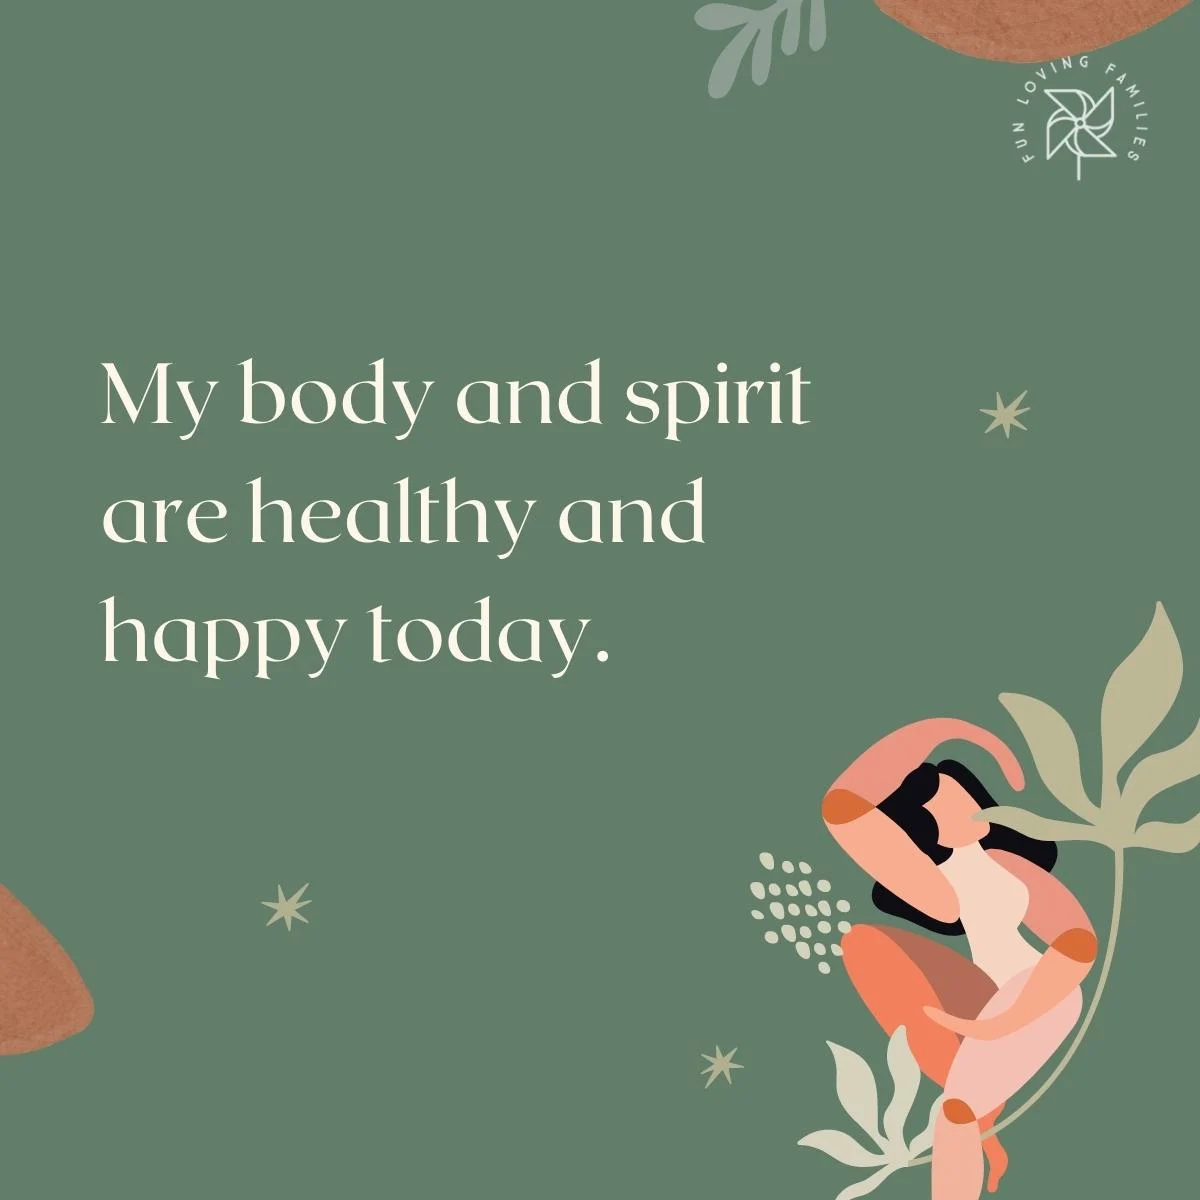 My body and spirit are healthy and happy today affirmation